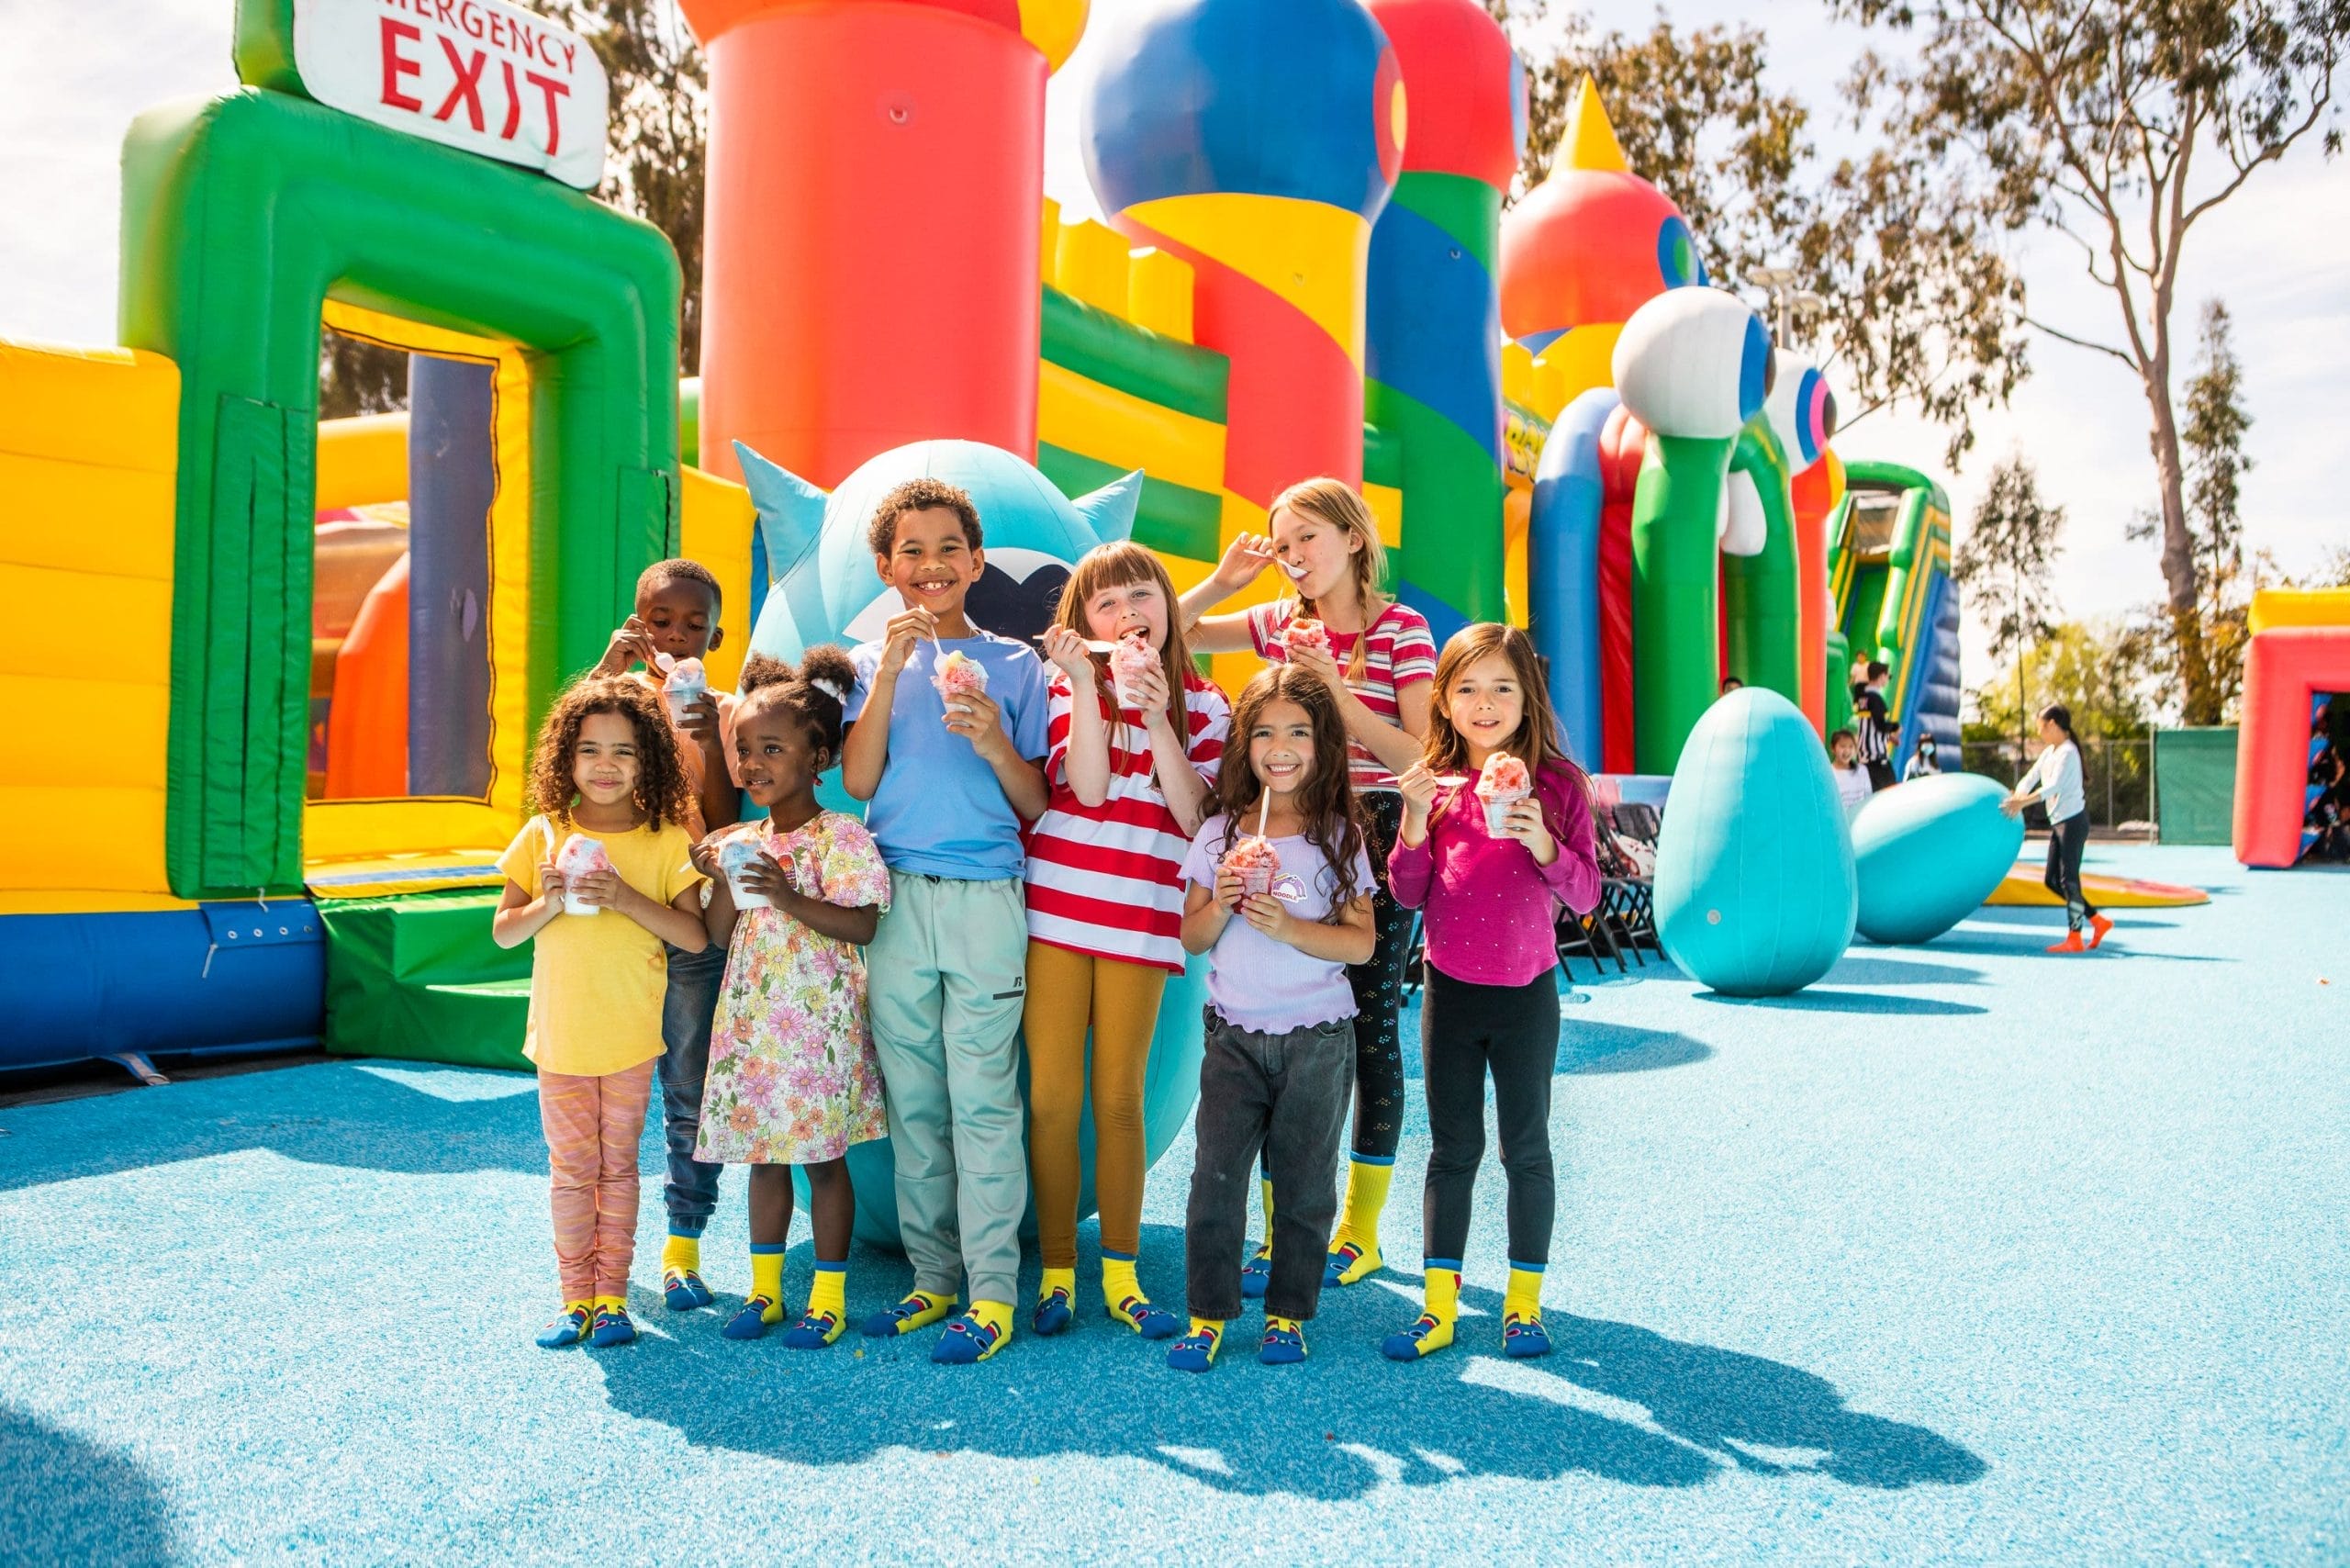 Kids smiling in the sun next to a giant inflatable area. An illustration for Funbox Virginia Beach